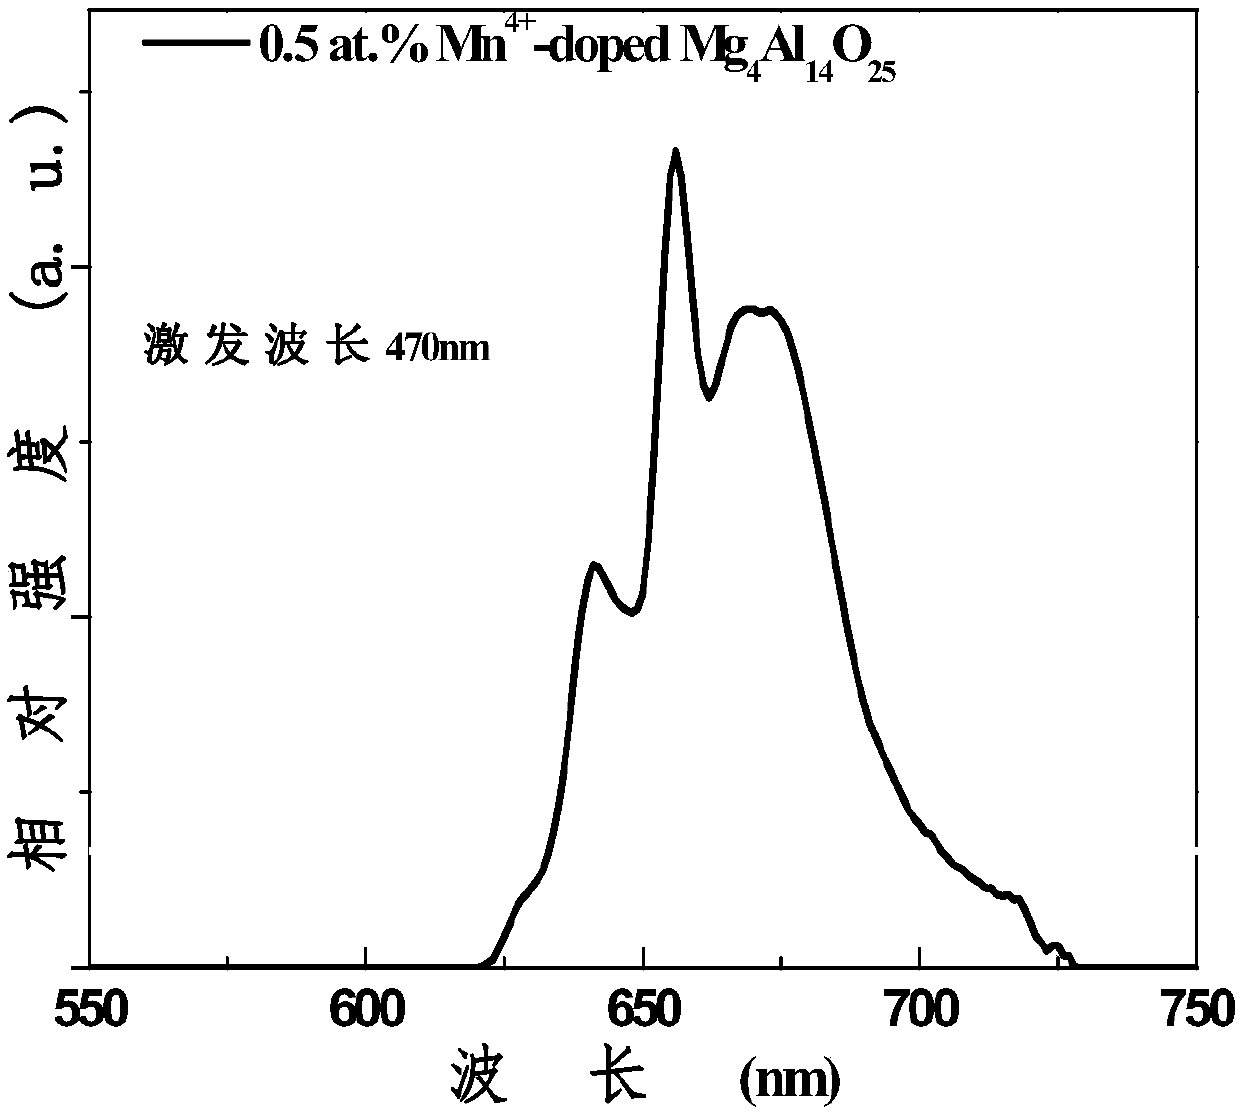 Manganese doped composite aluminate red luminescent material as well as preparation method and purpose thereof